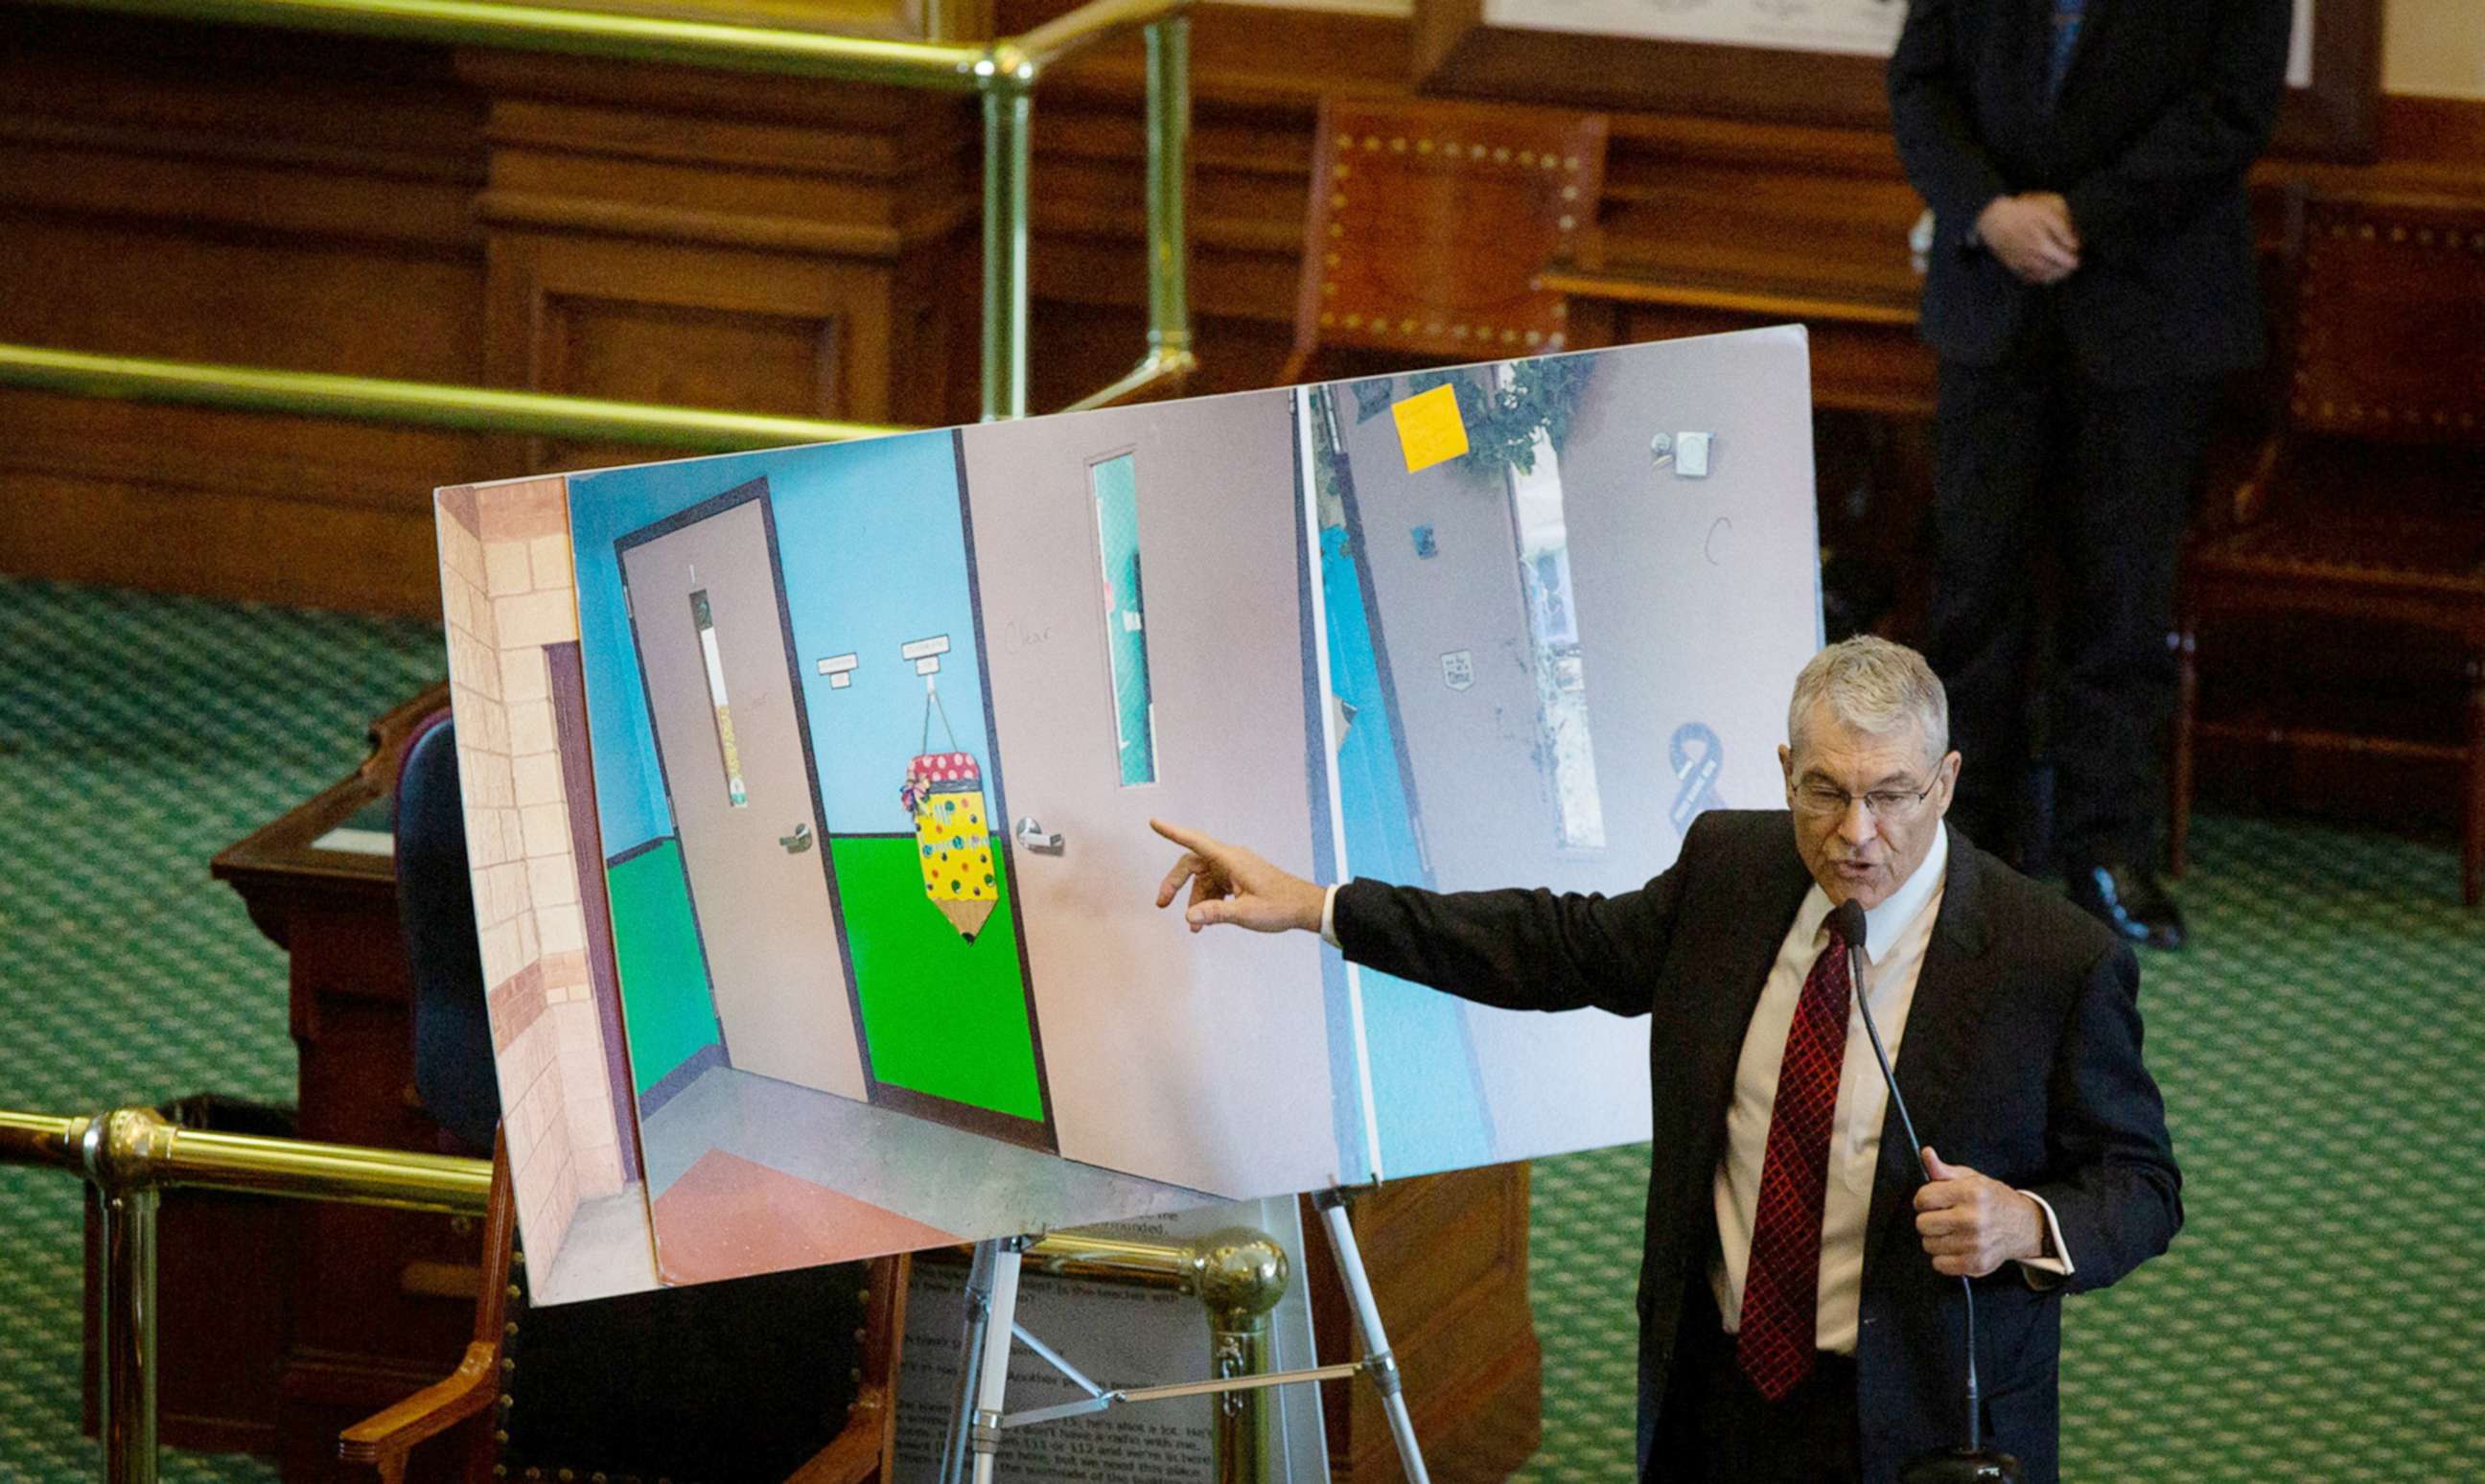 PHOTO: Department of Public Safety Director Steve McCraw uses photos of doors to present what happened during the school shooting at Robb Elementary School in Uvalde to the Texas during the hearing at the State Capitol in Austin, Texas, June 21, 2022.